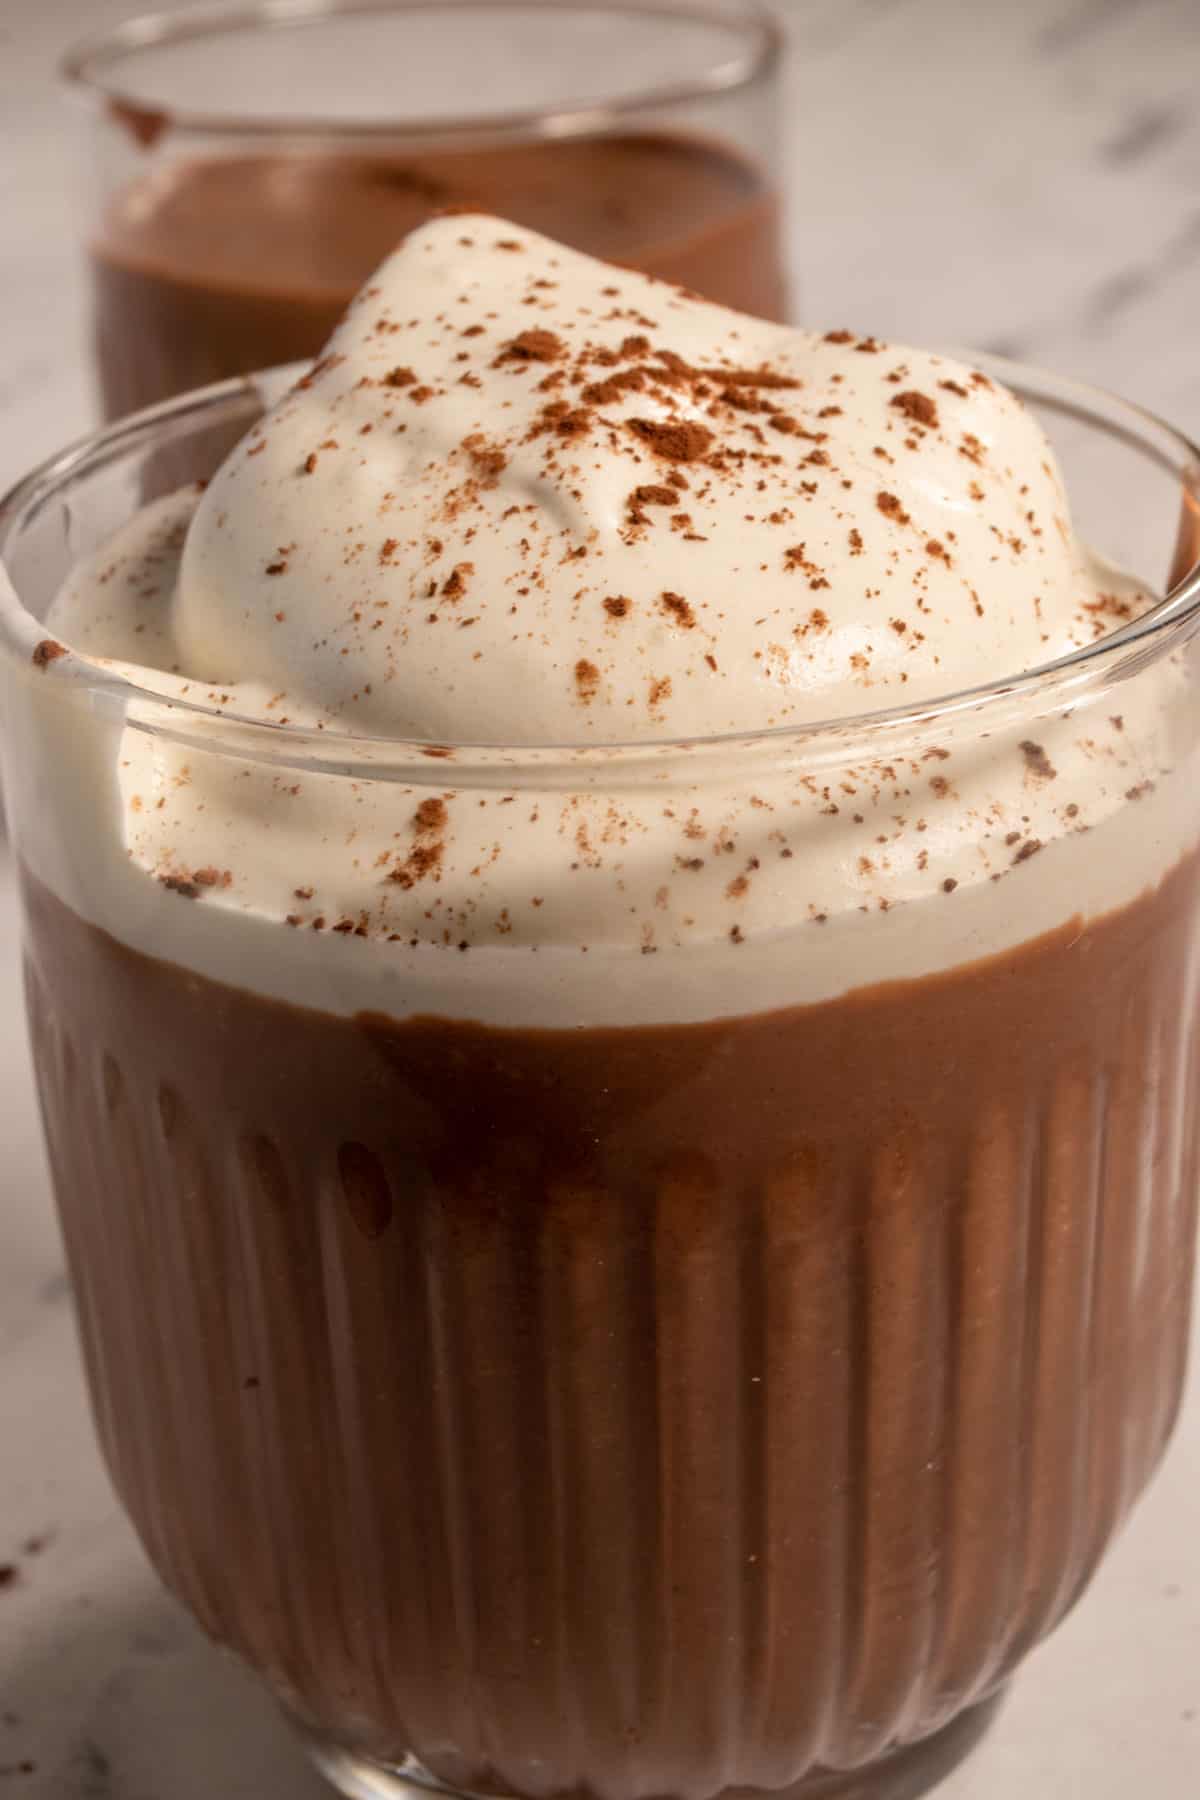 A close up image of chocolate mousse inside a dessert glass. The chocolate inside is thick after setting in the fridge. It is topped with lots of whipped cream.